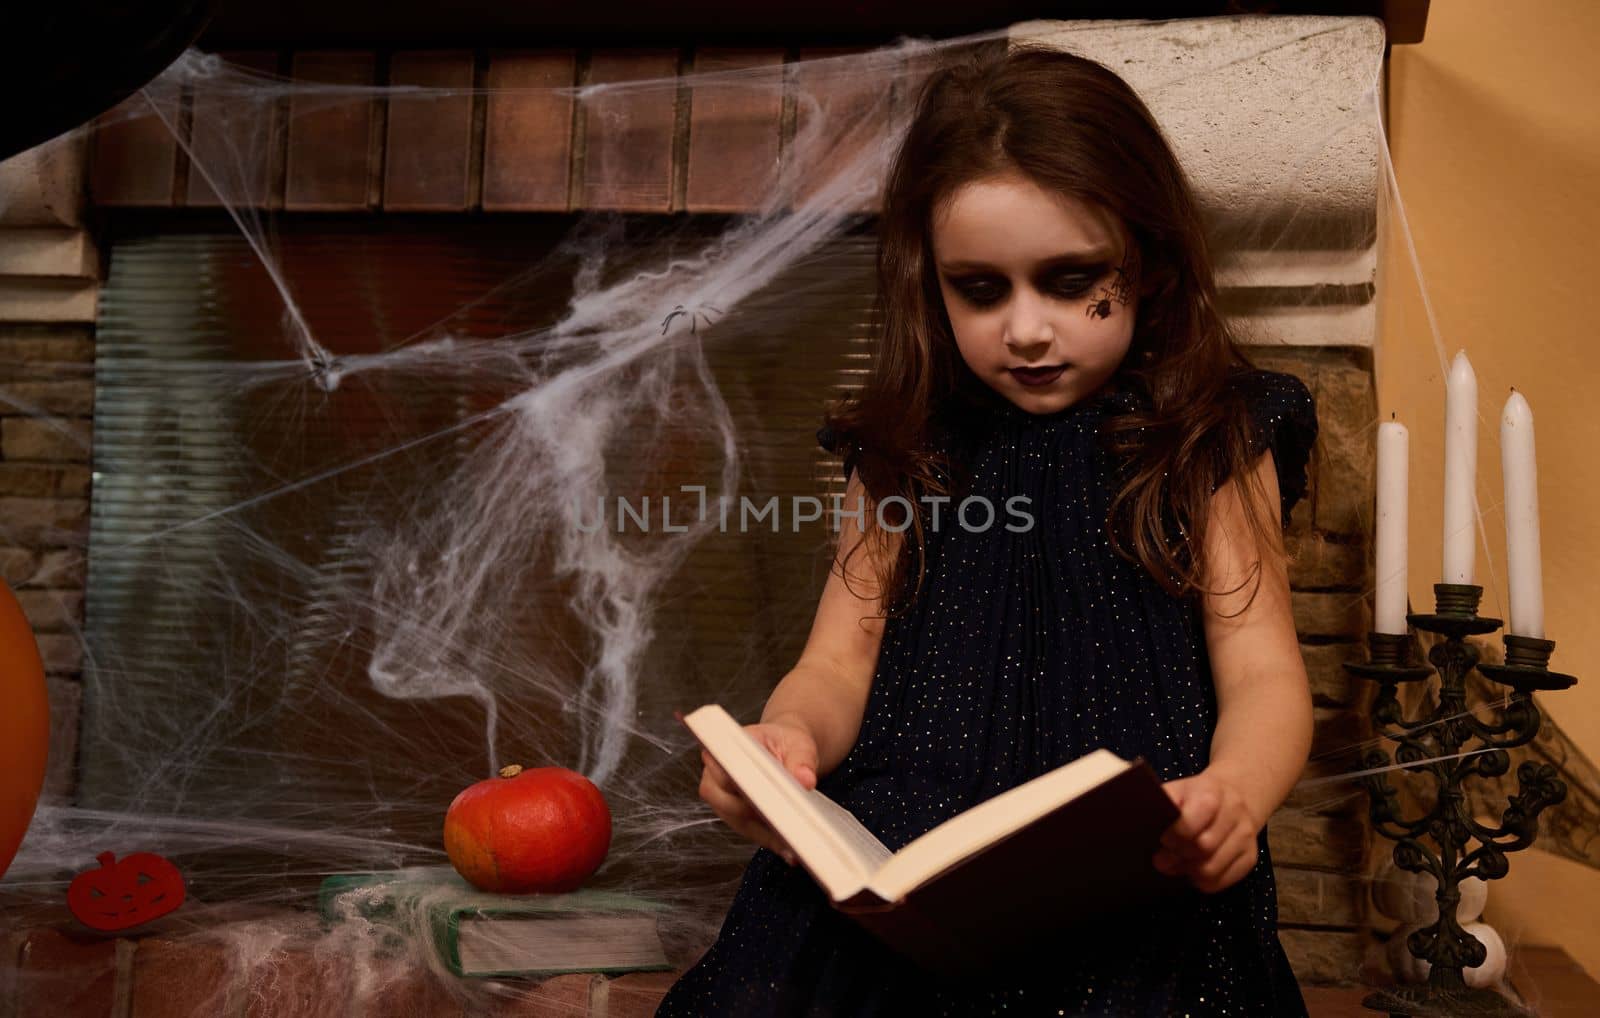 Gothic child girl with a book of spells, sitting by a cobweb-covered fireplace and learning sorcery on Halloween night by artgf